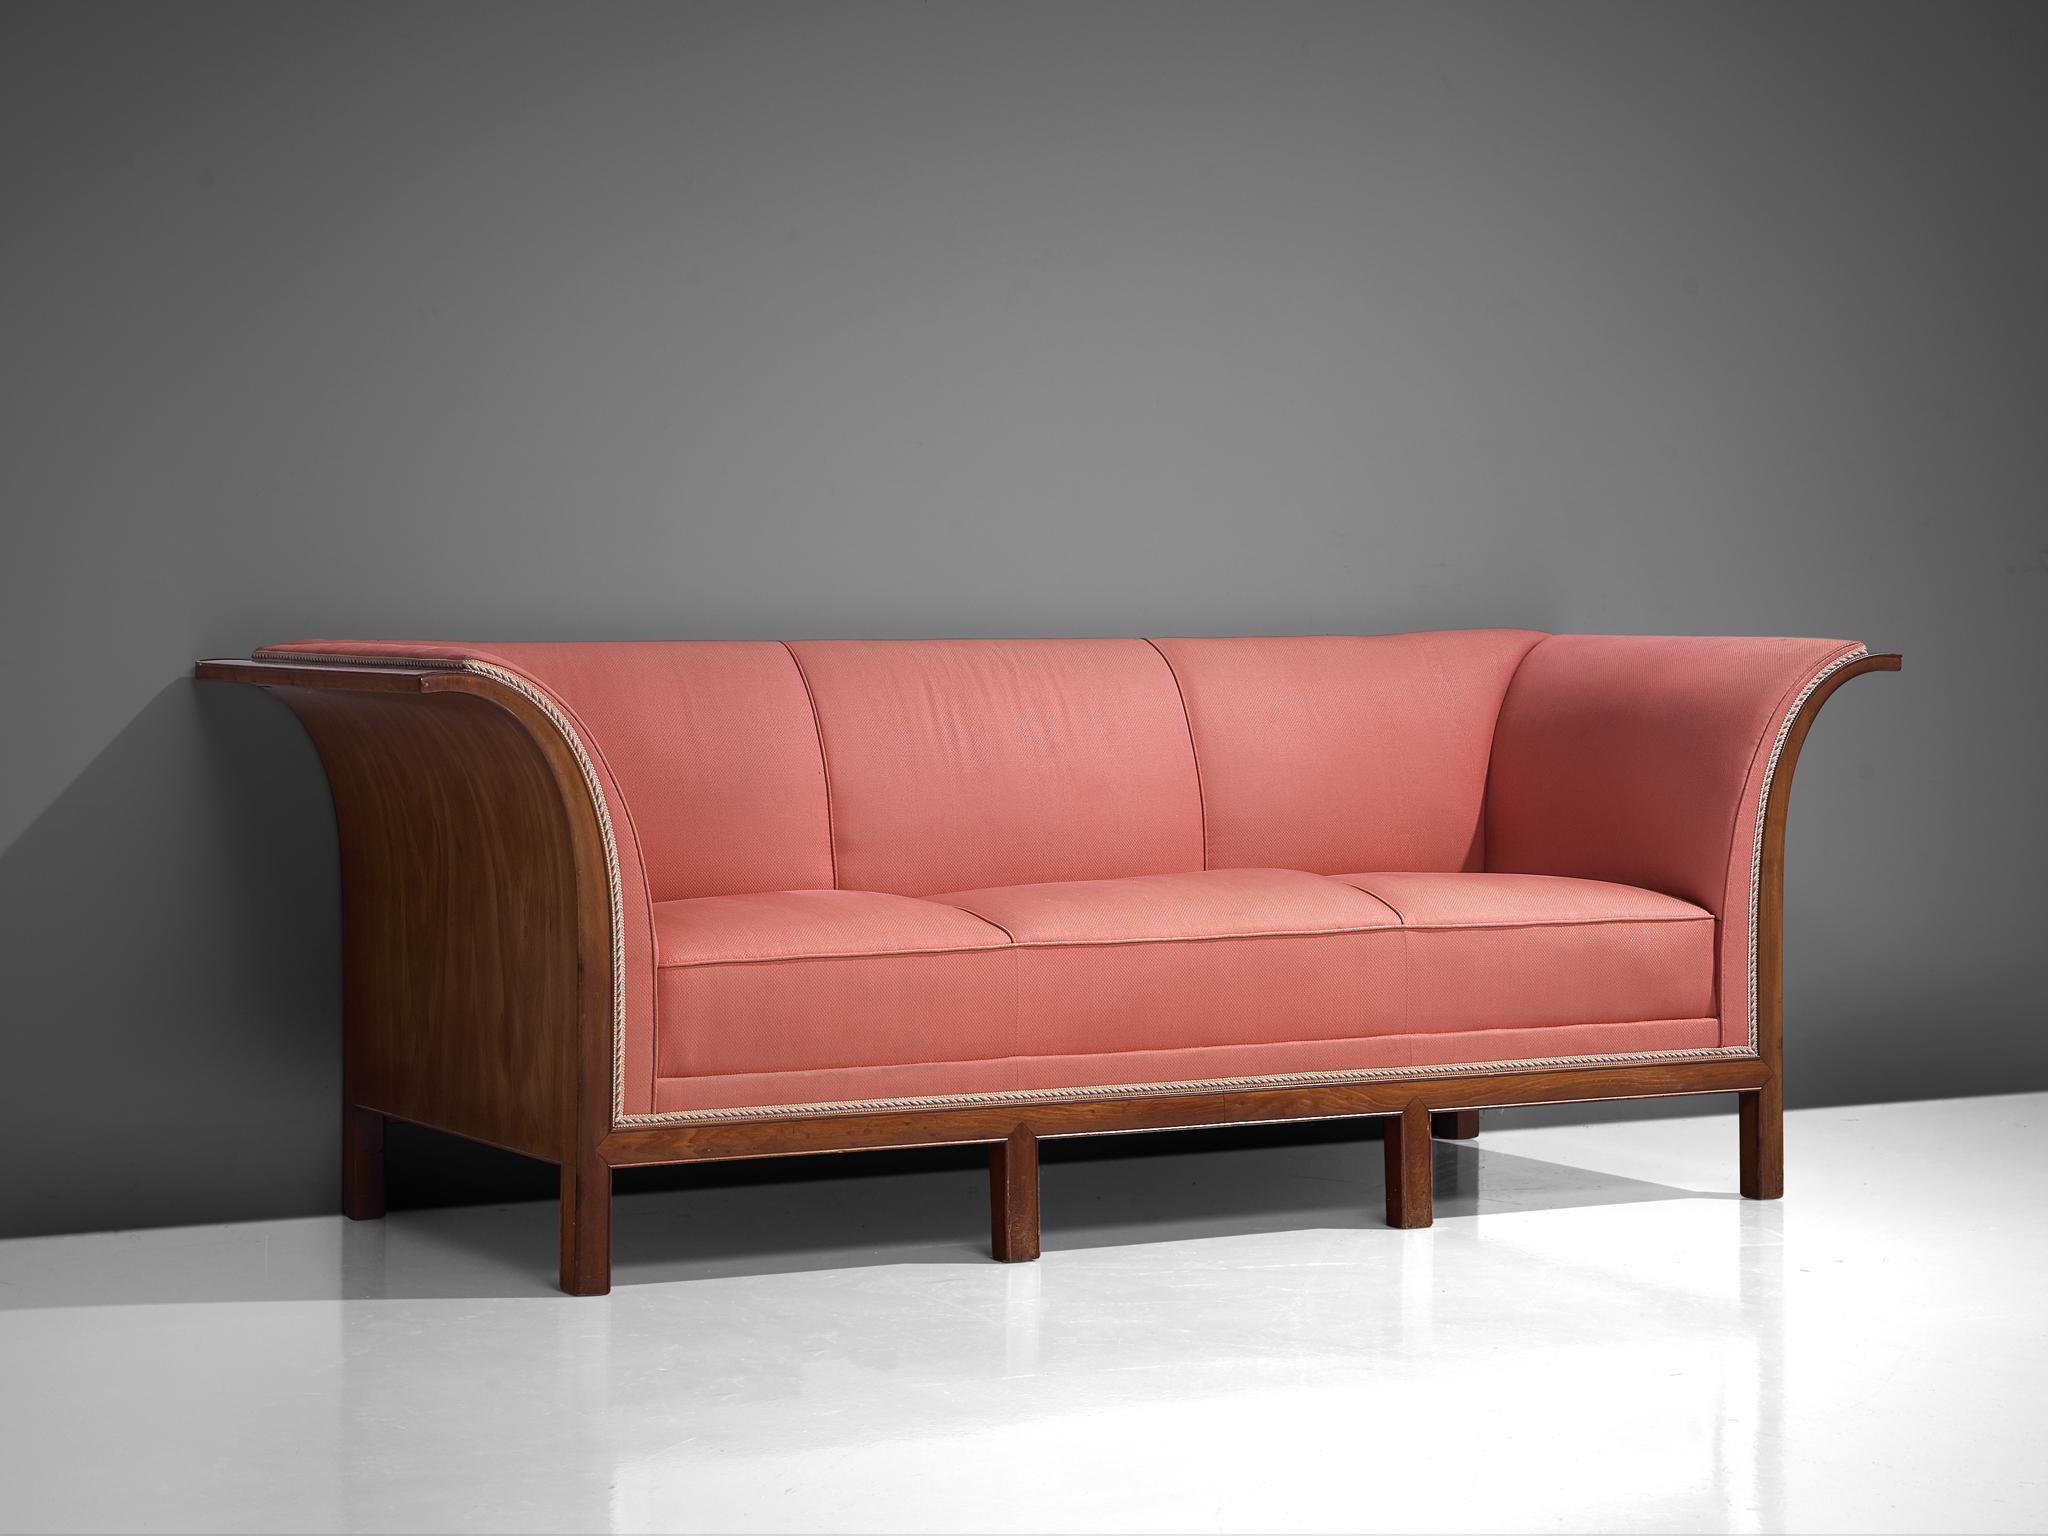 Fabric Frits Henningsen Sofa in Mahogany and Pink Upholstery For Sale